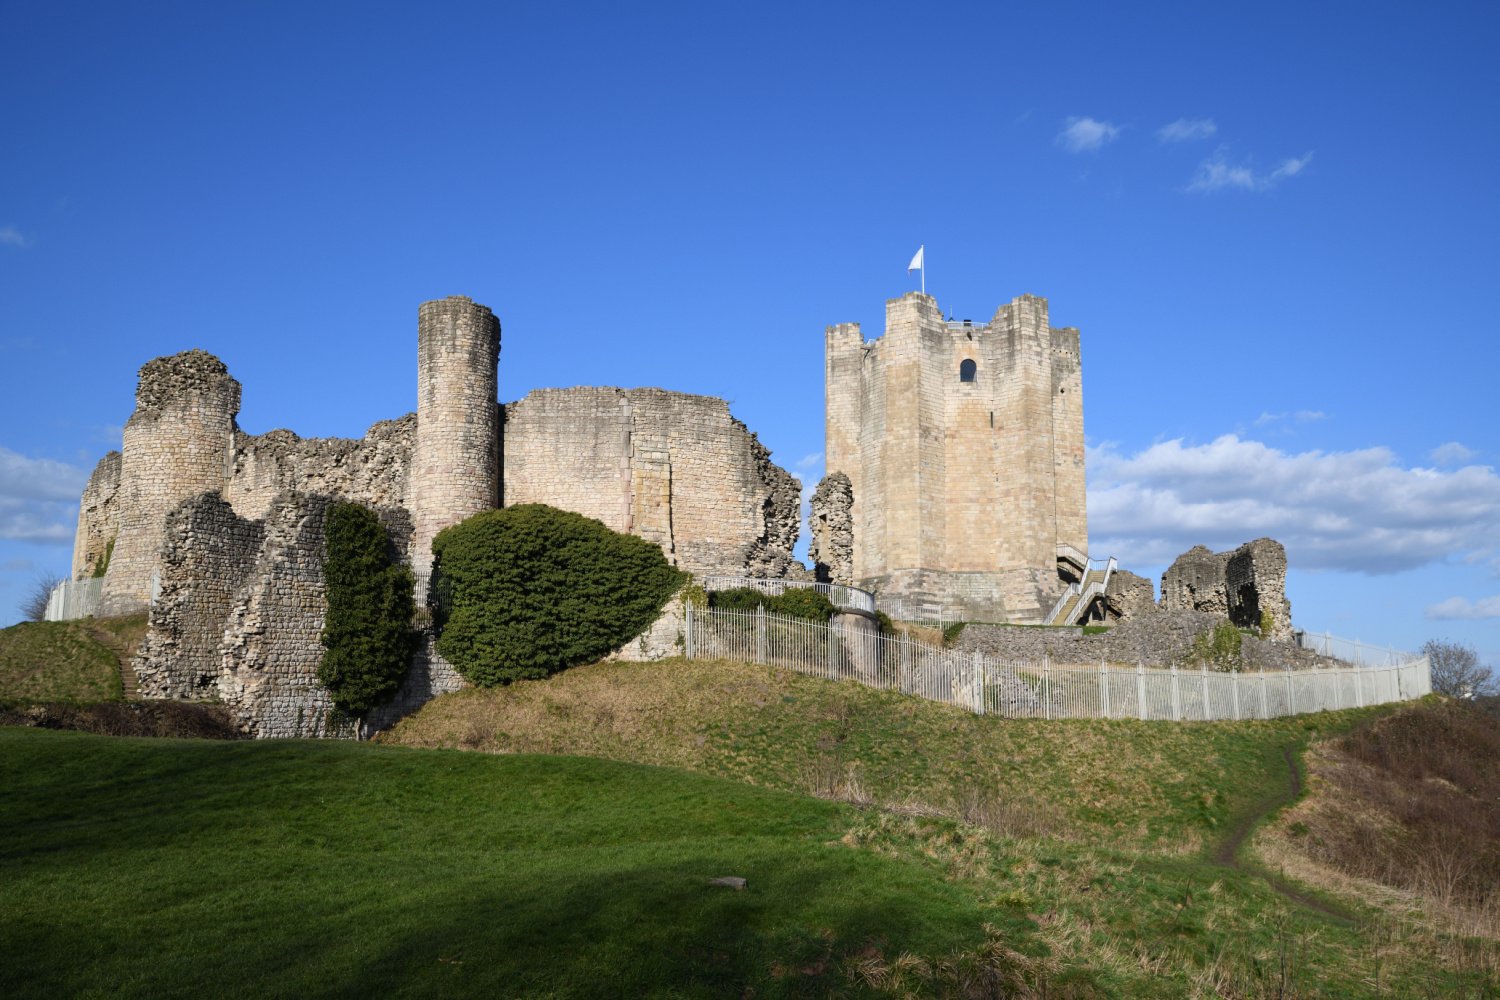 Image name conisbrough castle near doncaster south yorkshire the 22 image from the post A look at the history of Conisbrough Castle, with Dr Emma Wells in Yorkshire.com.